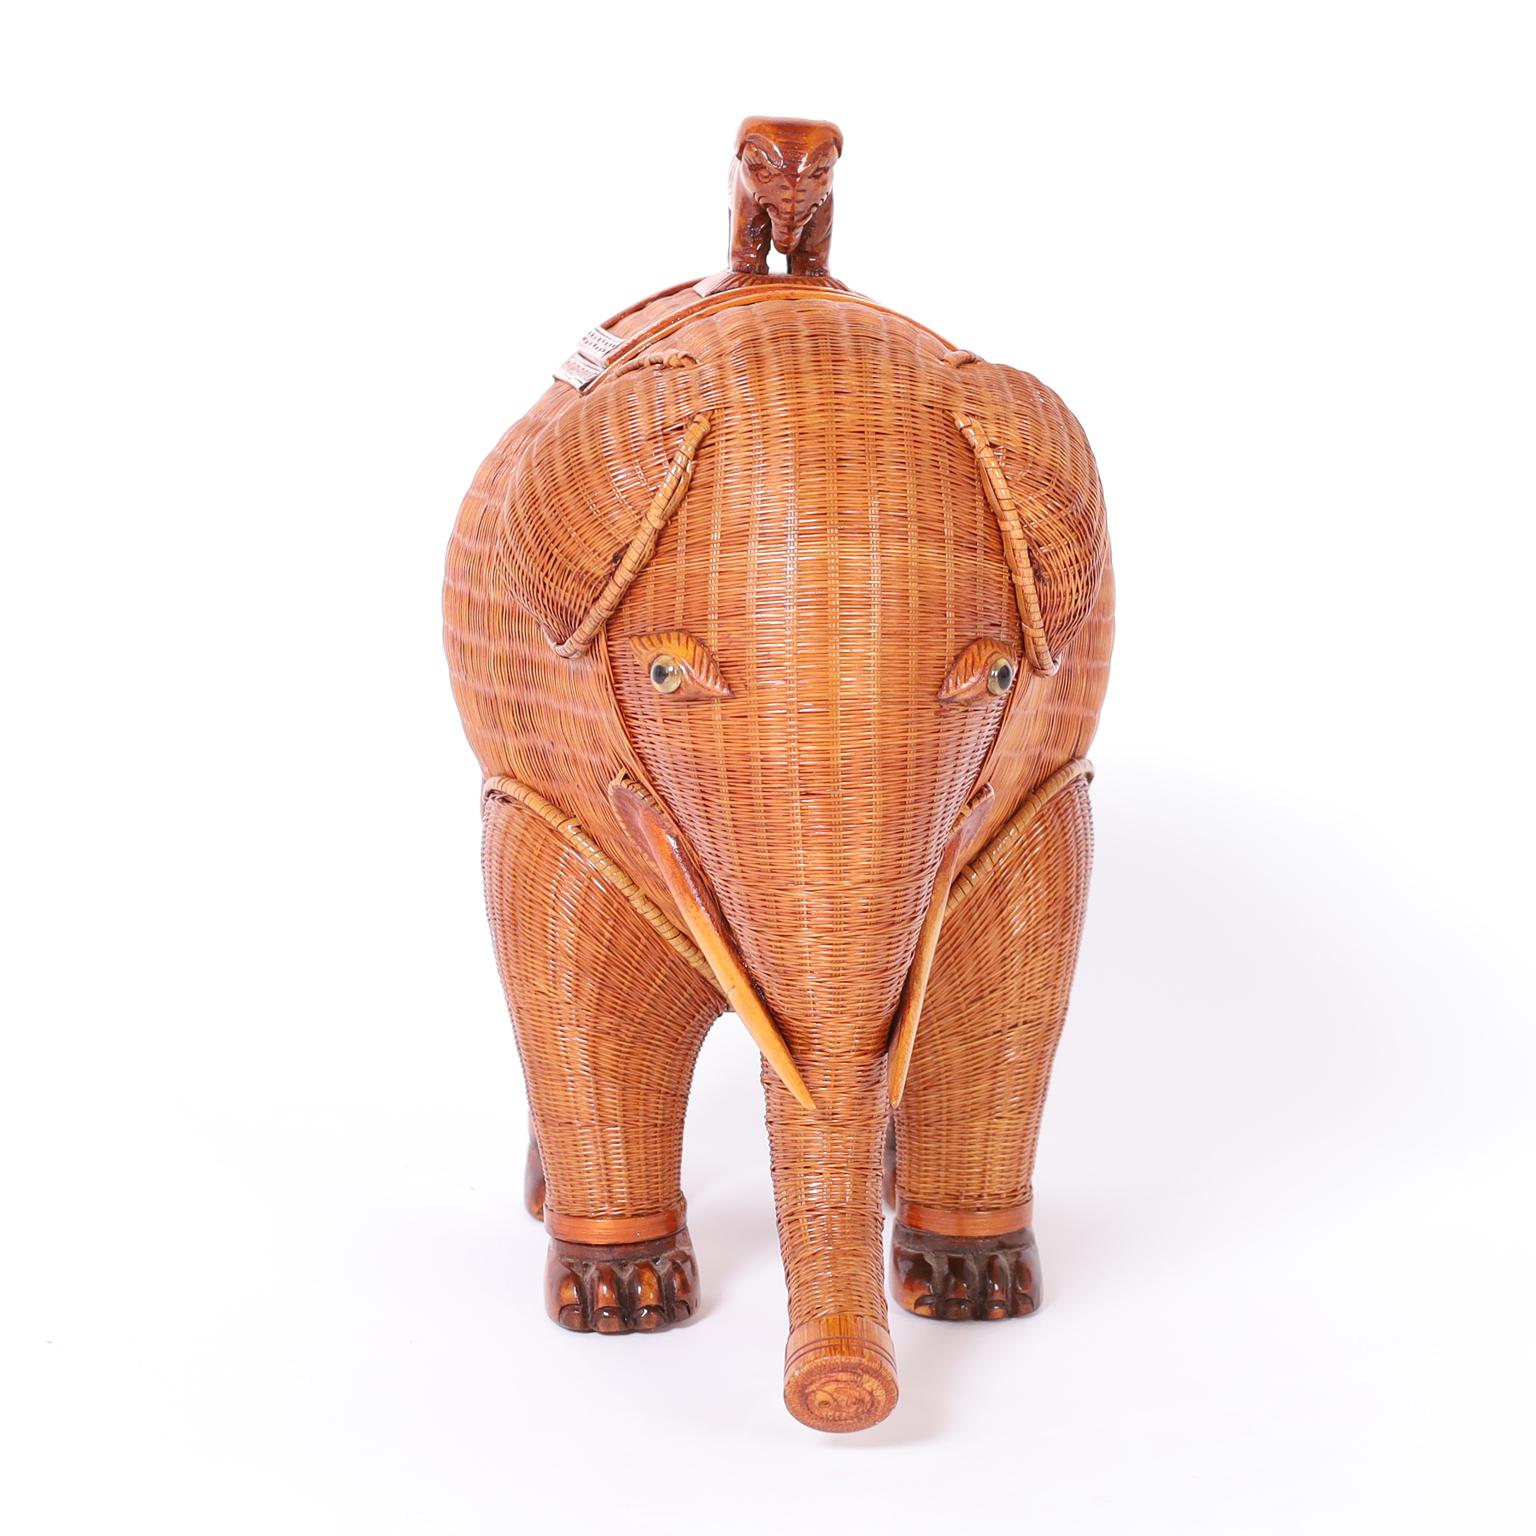 Chinese elephant box ambitiously crafted in wicker with carved wood tusks, feet, and lid handle. From the noted Shanghai collection.